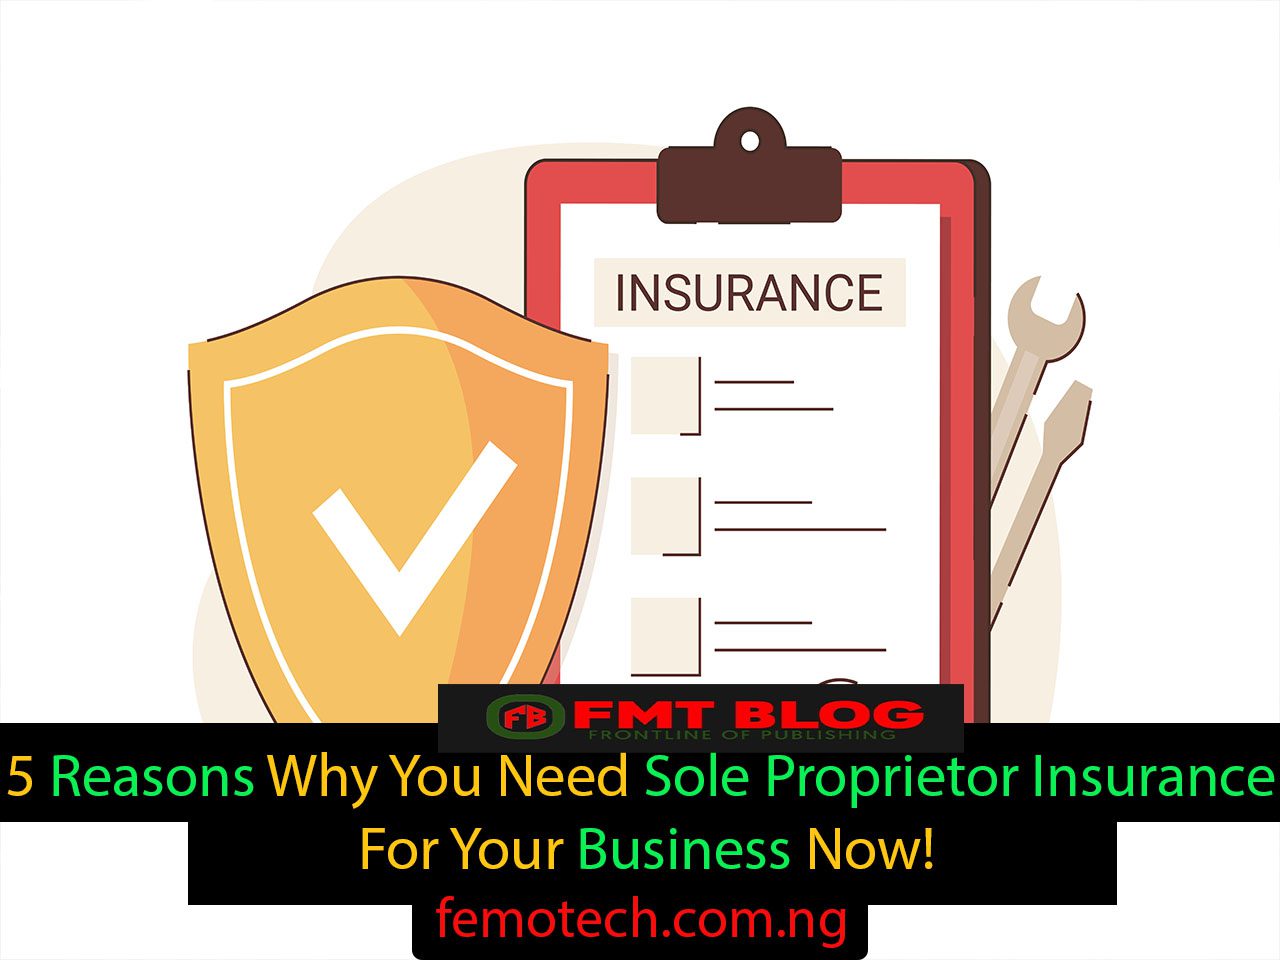 5 Reasons Why You Need Sole Proprietor Insurance Now